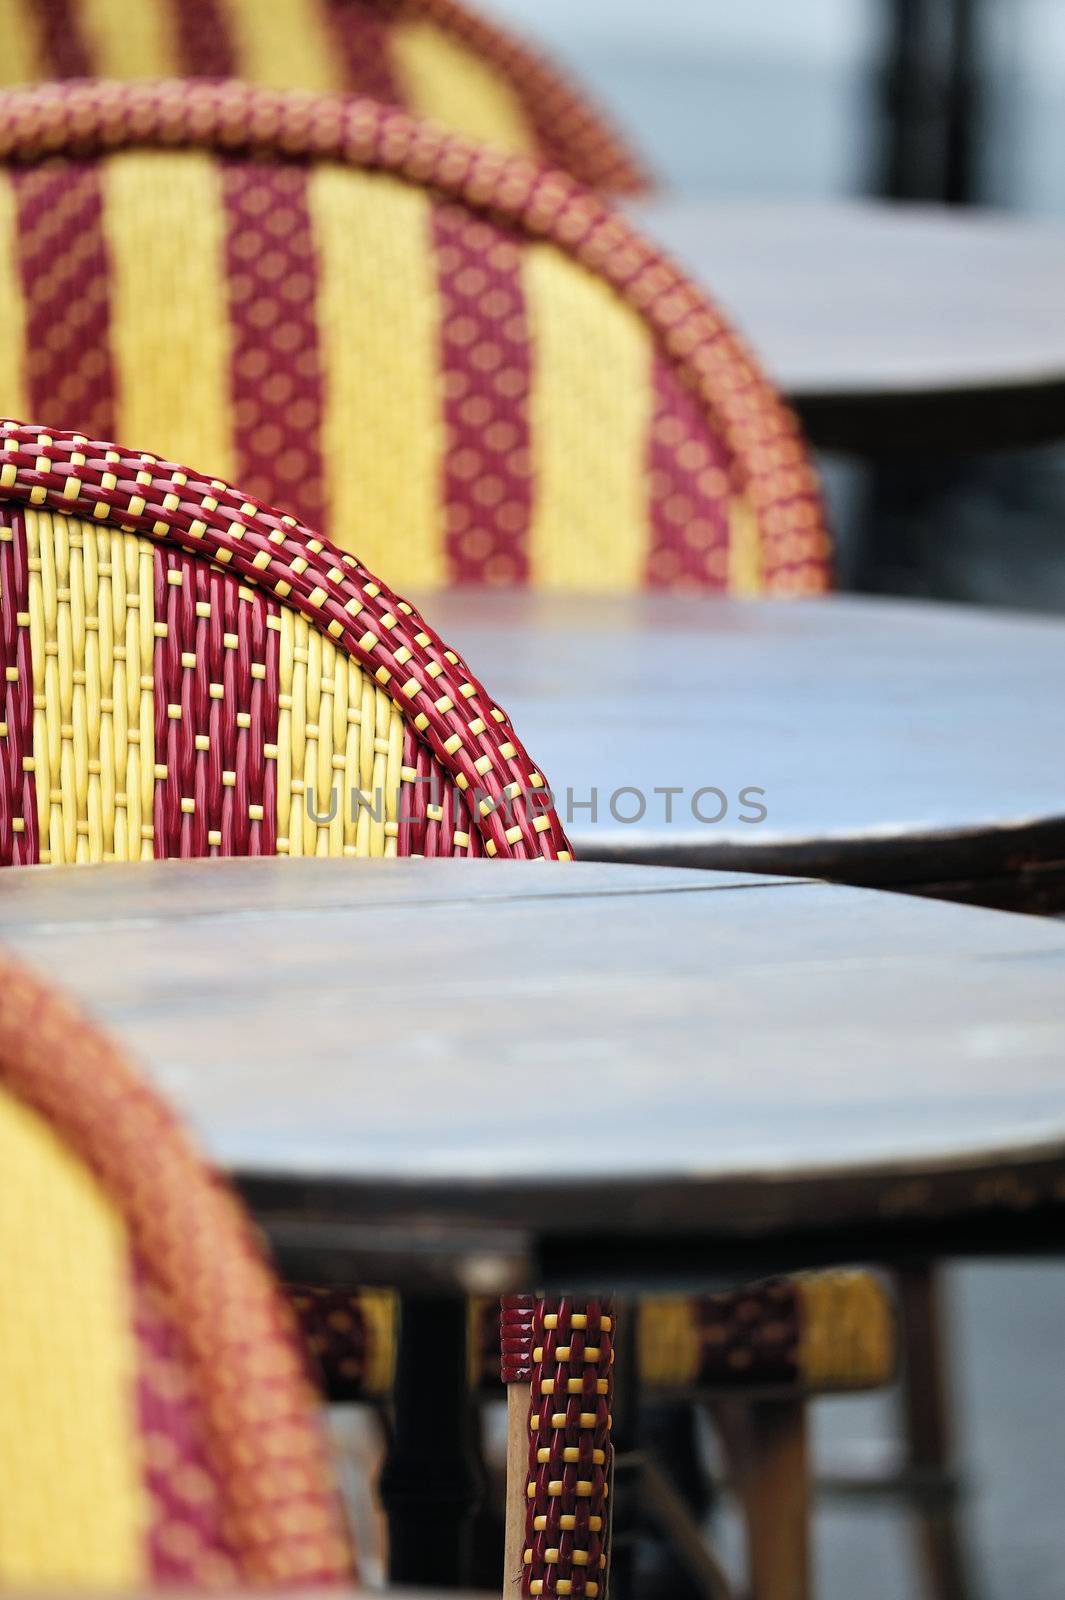 Round tables and wicker chairs in cafe in Paris. Photo with tilt-shift effect